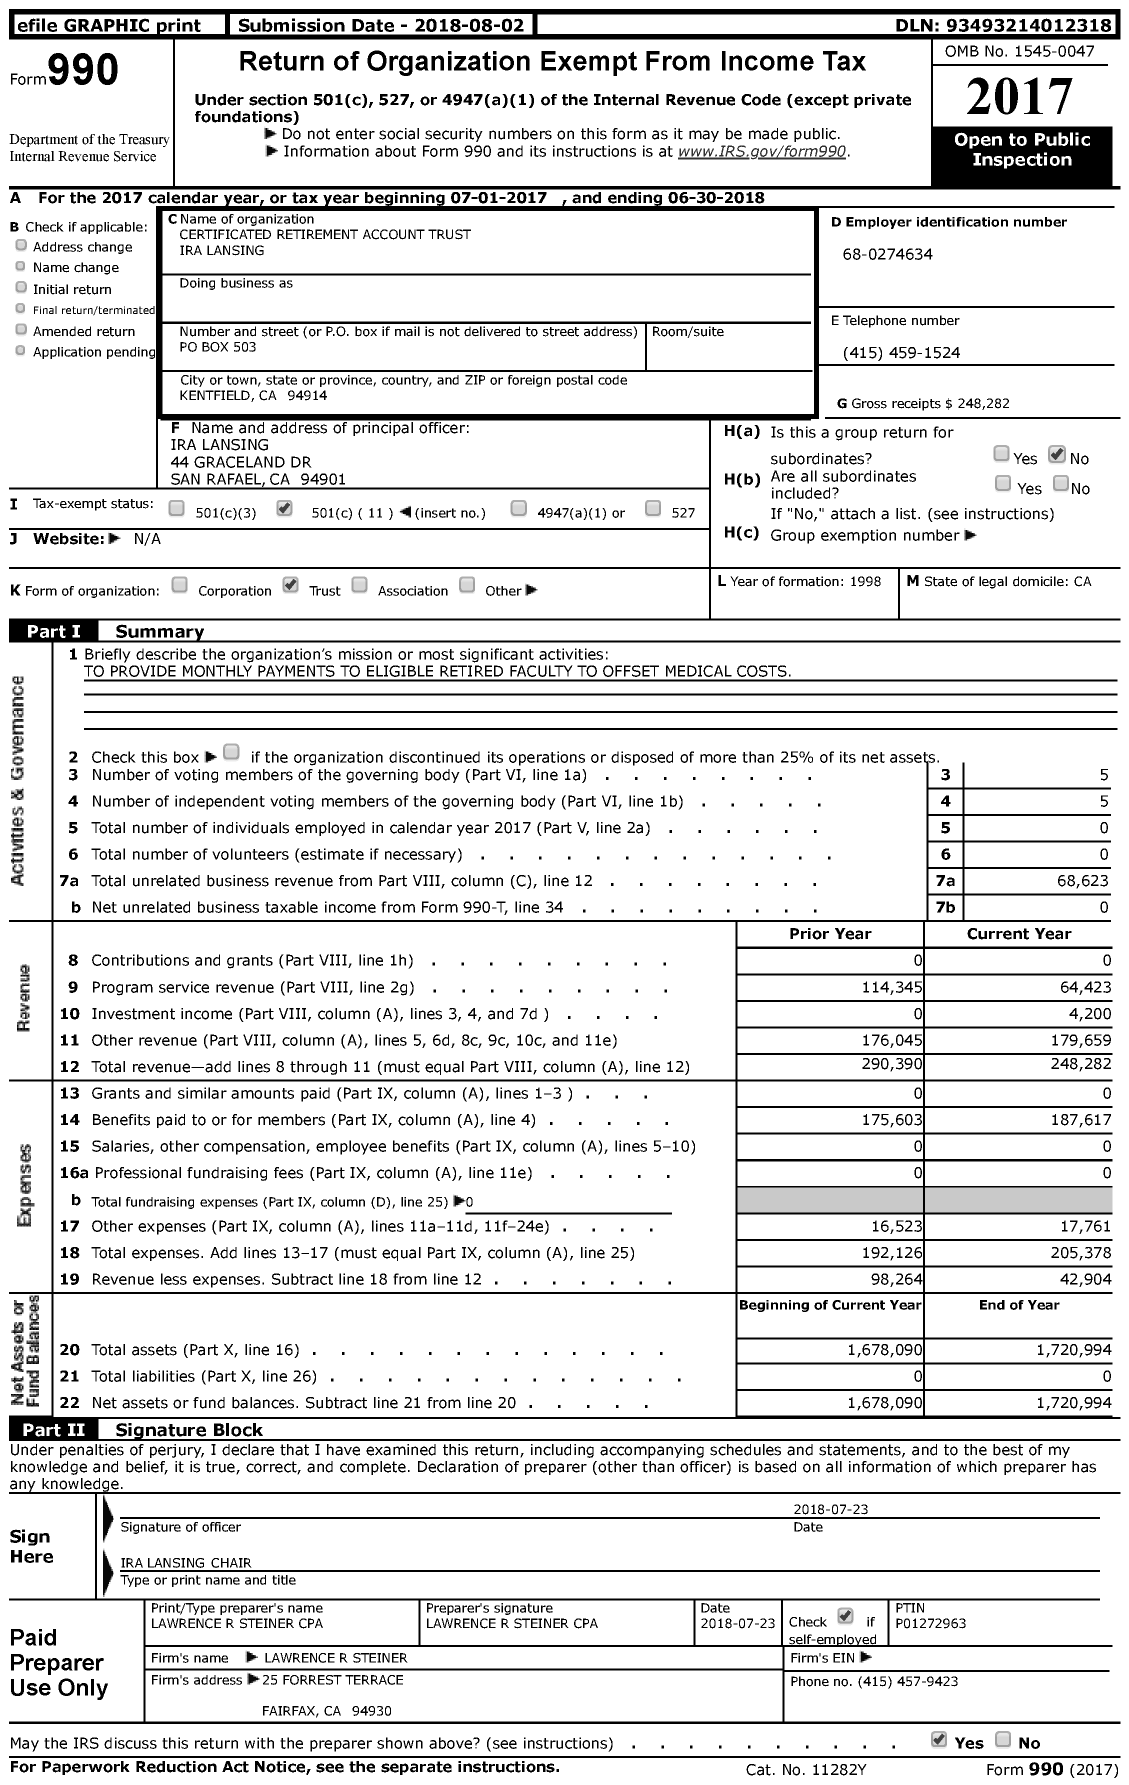 Image of first page of 2017 Form 990 for Certificated Retirement Account Trust